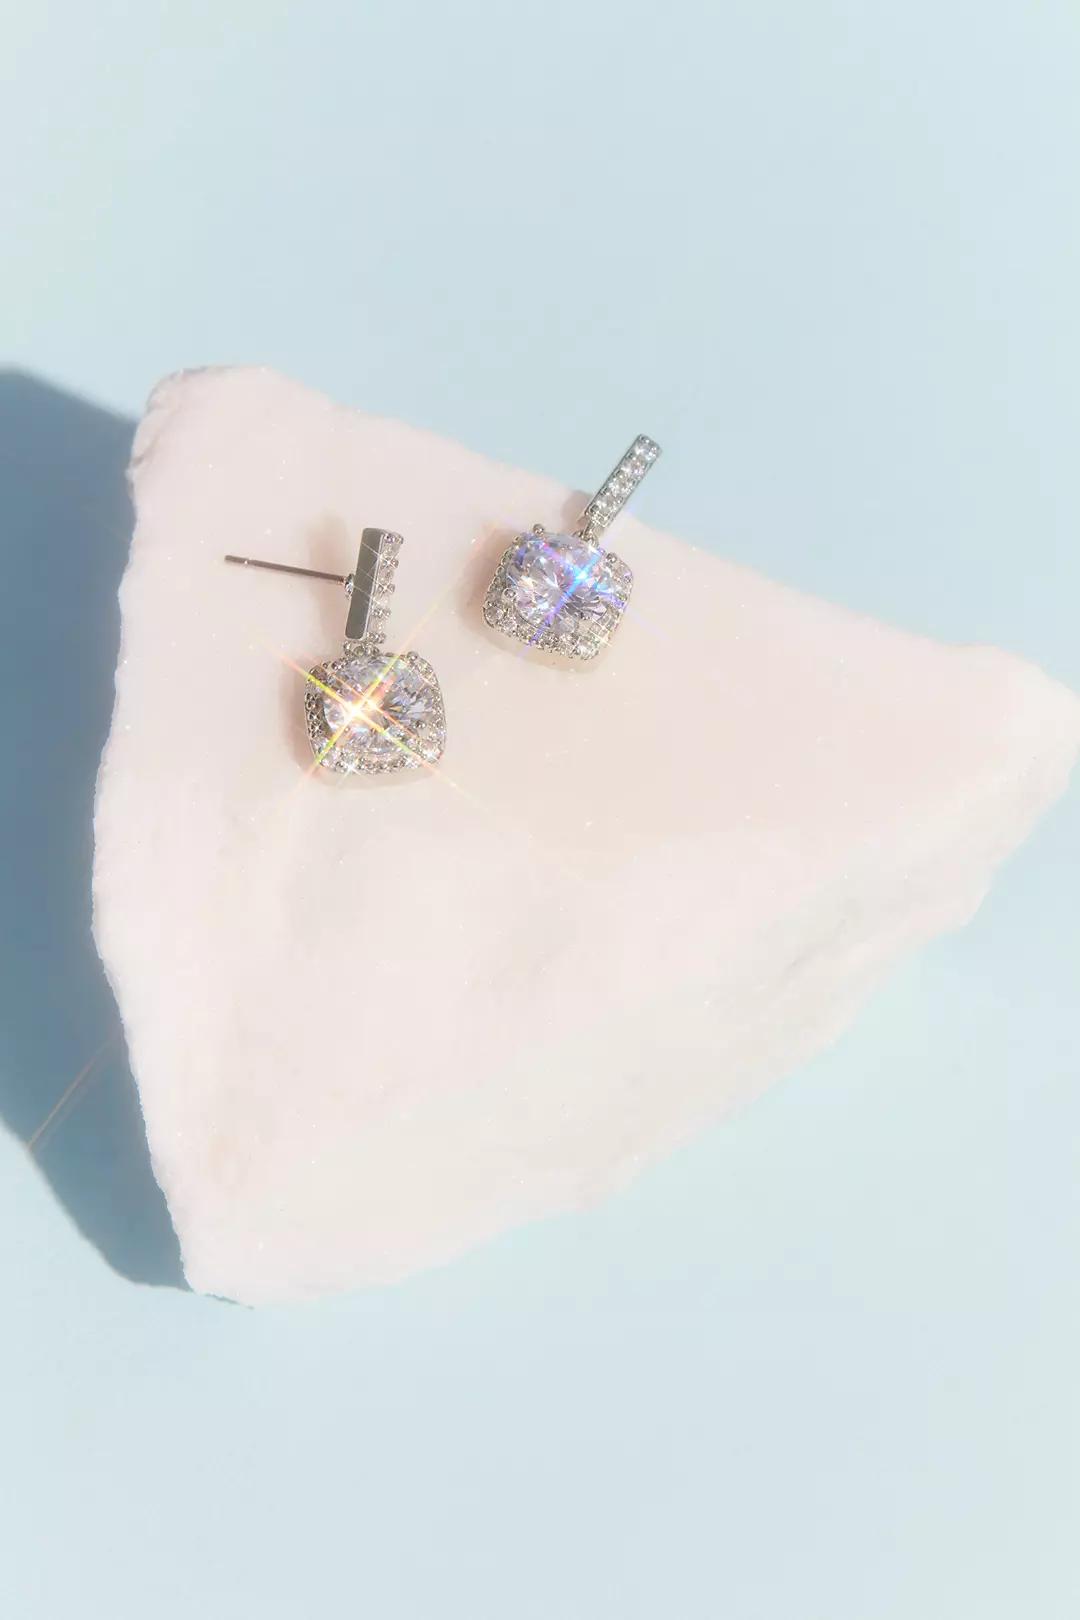 Statement Crystal Stud Earrings with Pave Halo Image